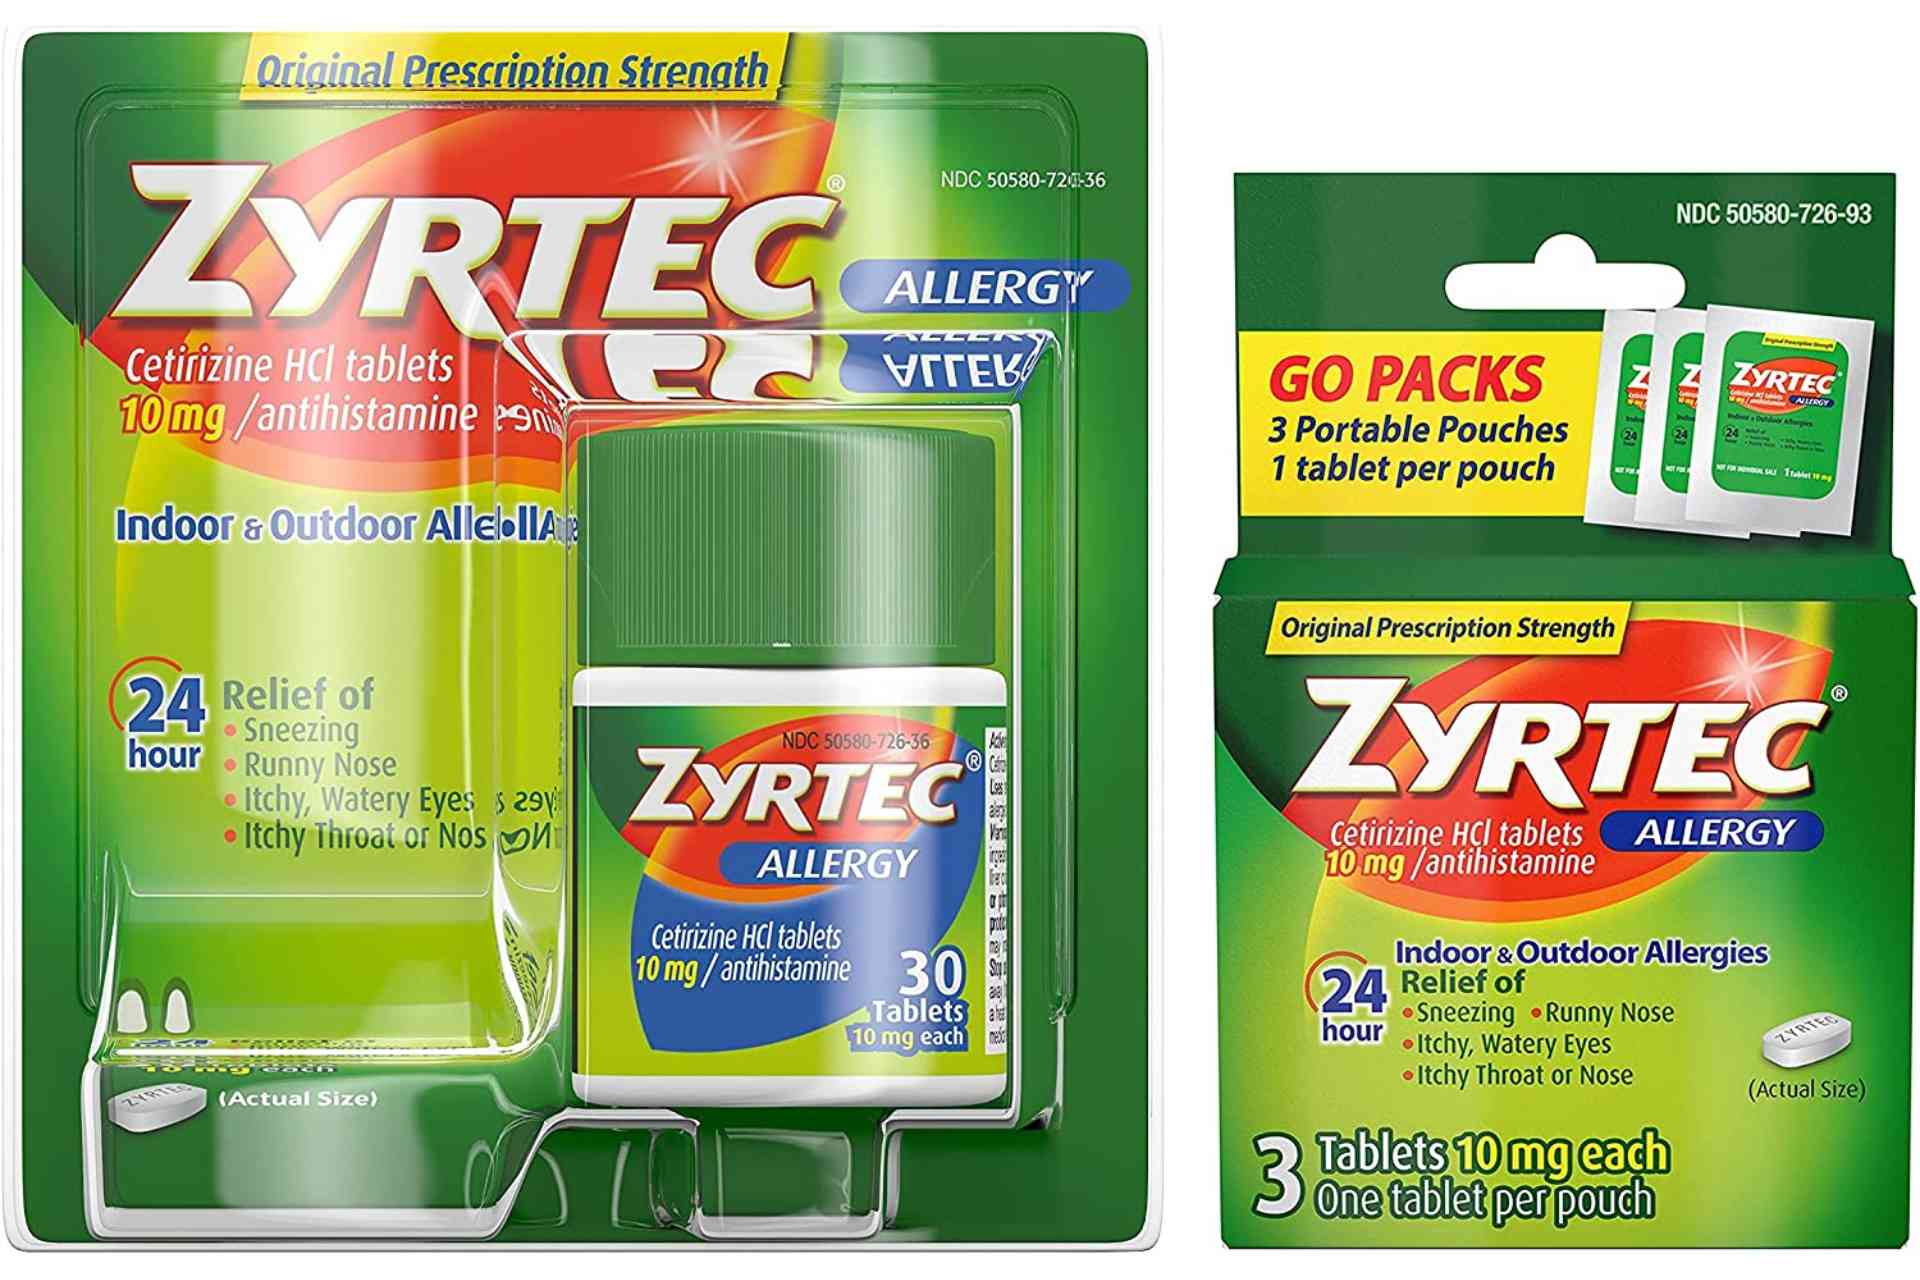 Zyrtec-Best-Antihistamine-For-Tight-Chest-post-images-smgs